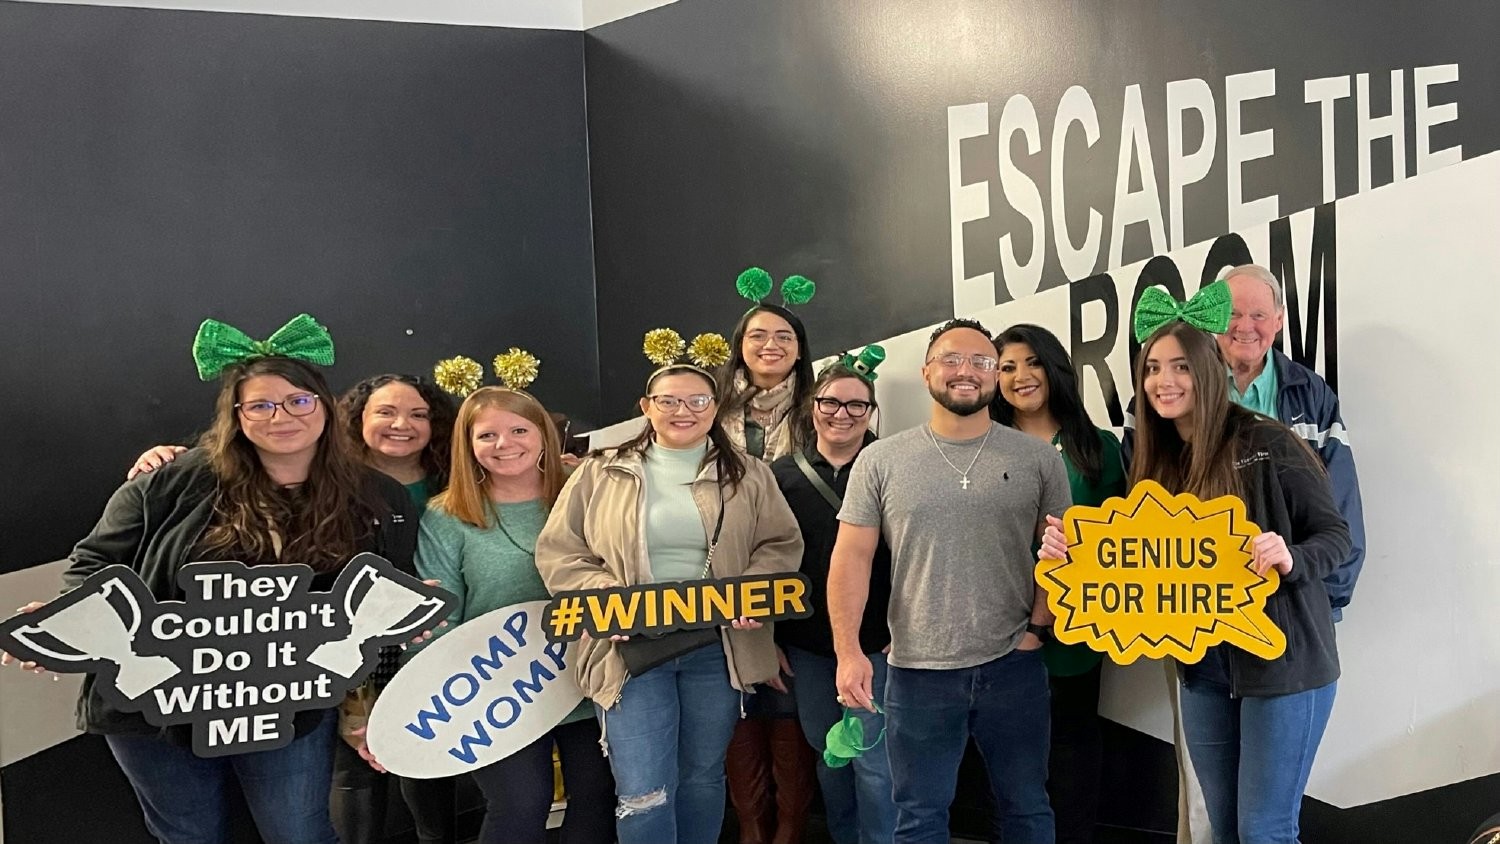 On St. Patrick's Day, our San Antonio team got together for dinner and a team-building activity at Escape the Room! 